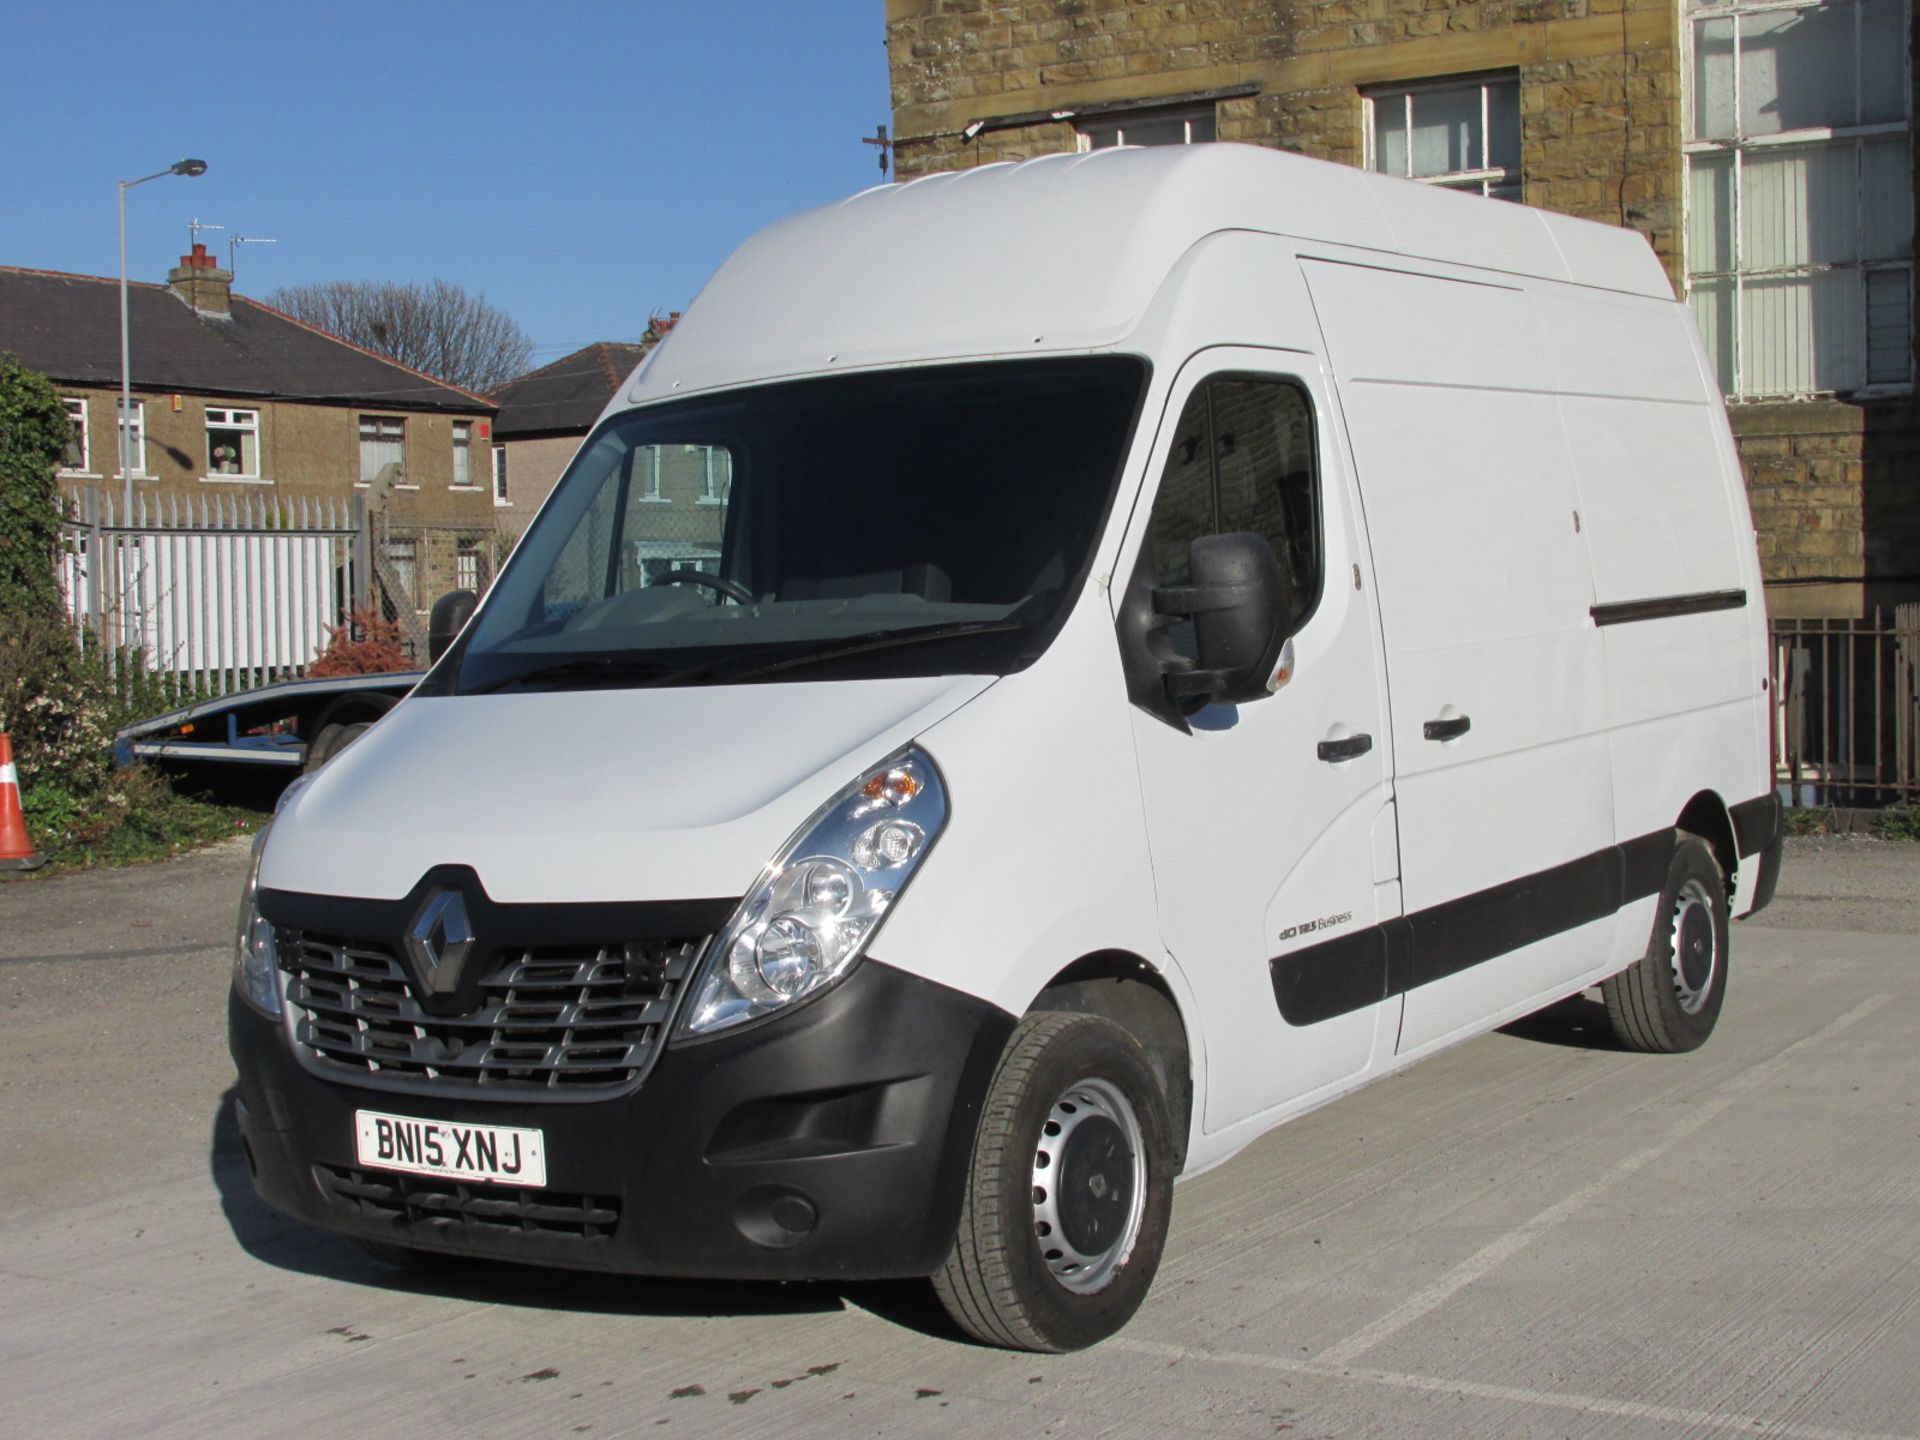 BN15 XNJ Renault Master MH35DCi 125High Roof - Image 6 of 39